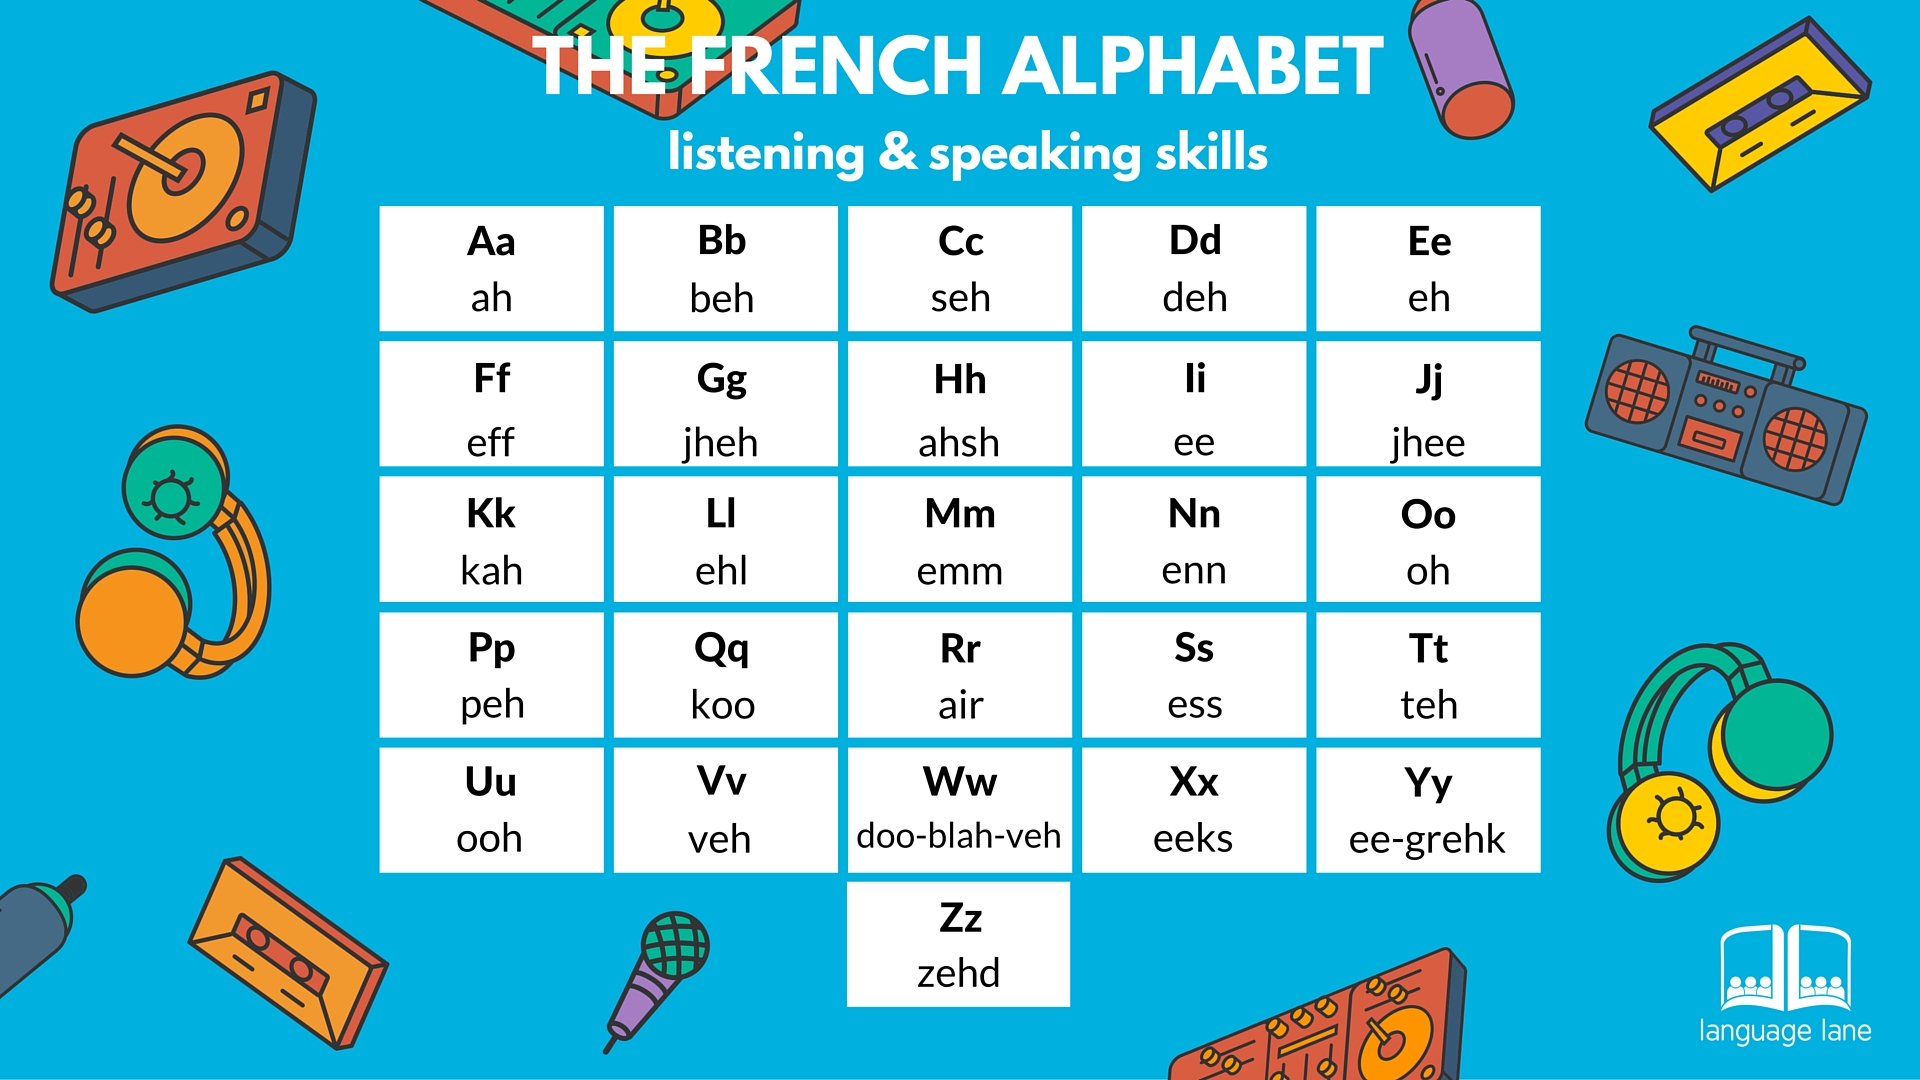 Phonetic Alphabet In French - French Phonetic Alphabet French Lessons Online Paris